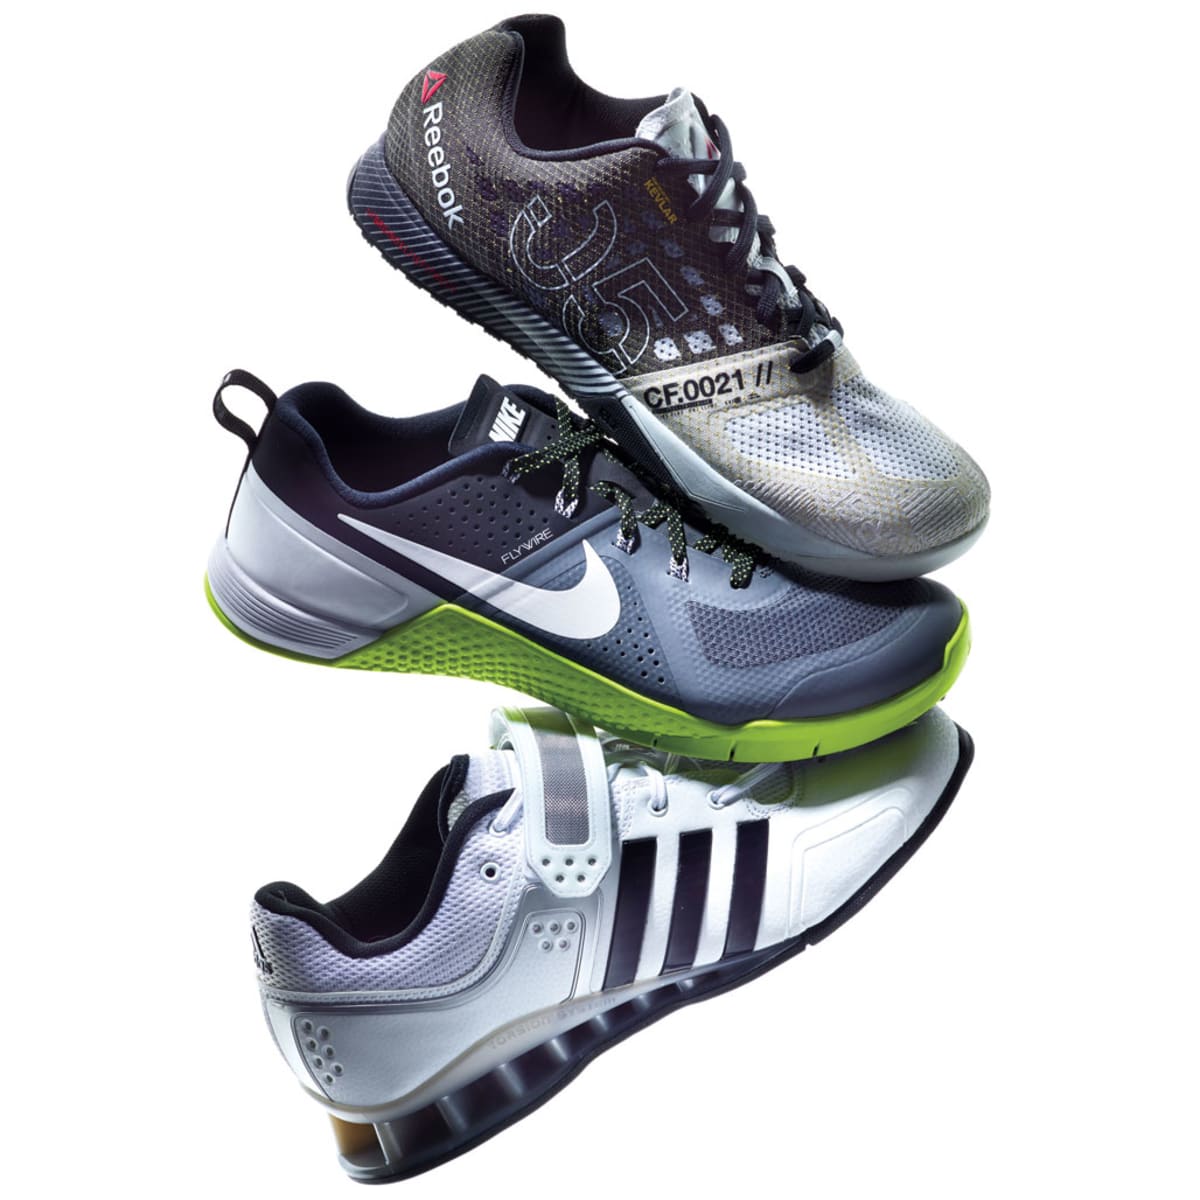 The Best CrossFit and Lifting Shoes - Men's Journal